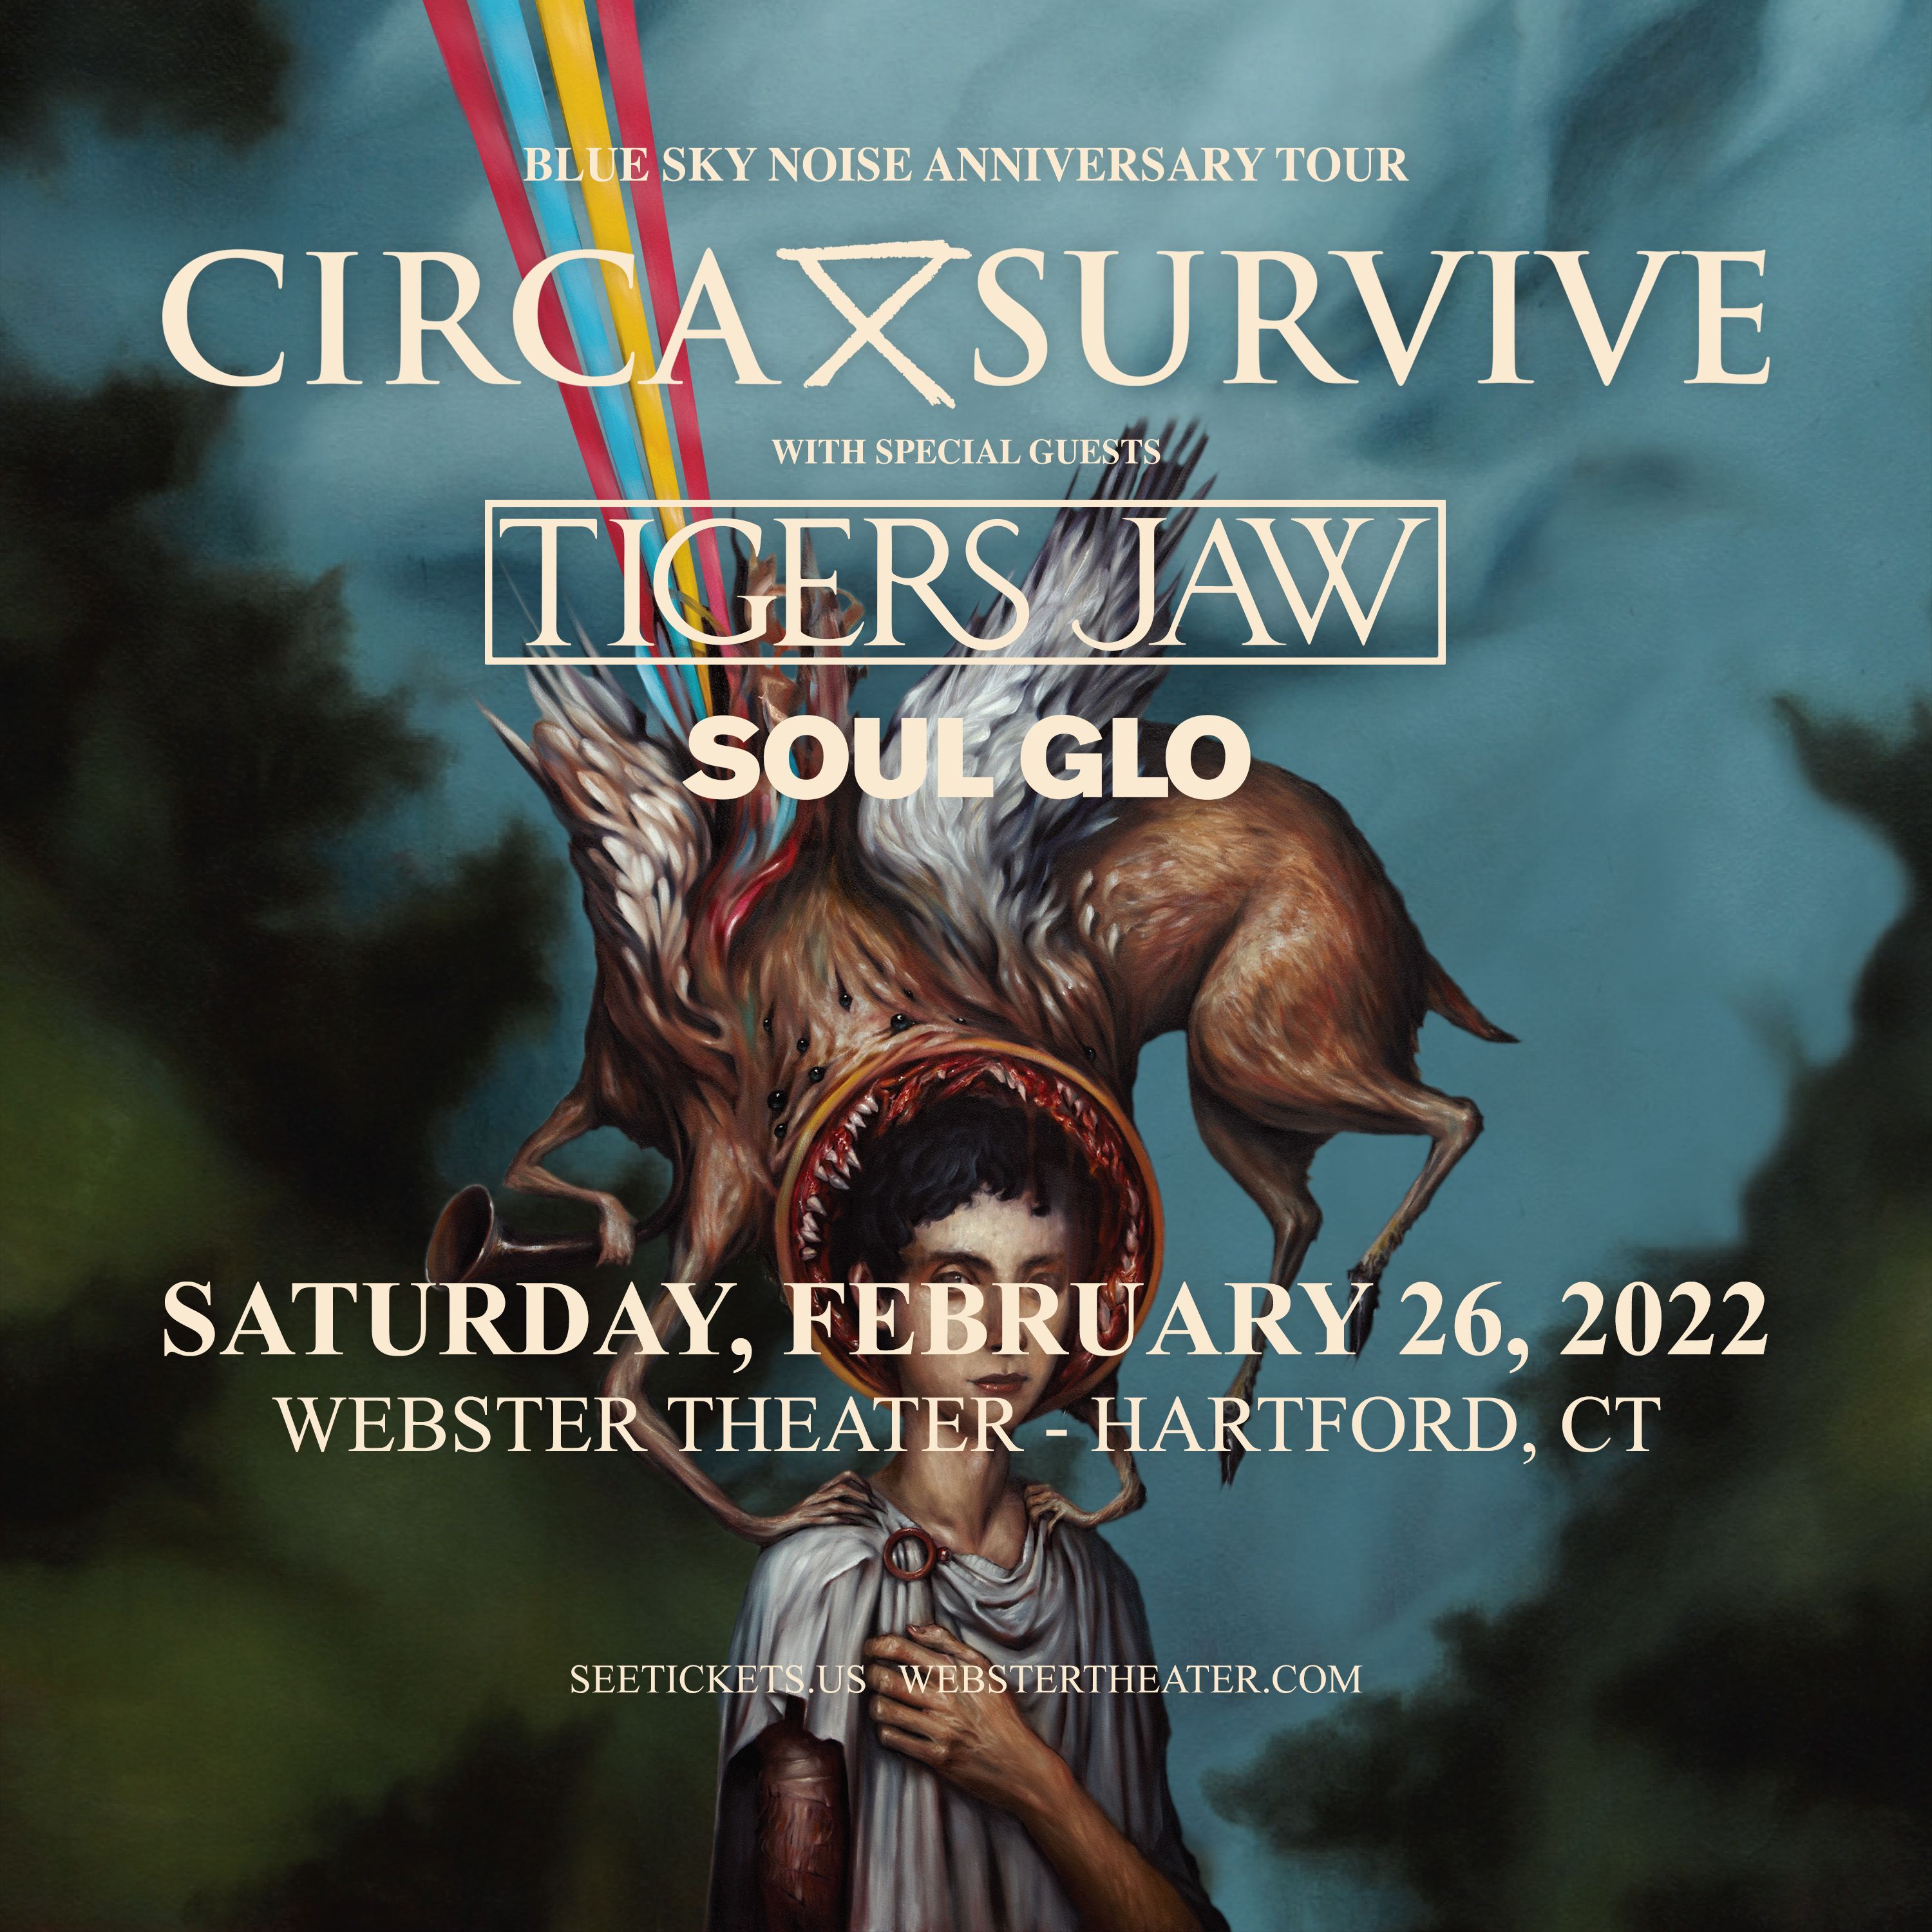 Buy Tickets to CIRCA SURVIVE BLUE SKY NOISE 10 ANNIVERSARY TOUR in